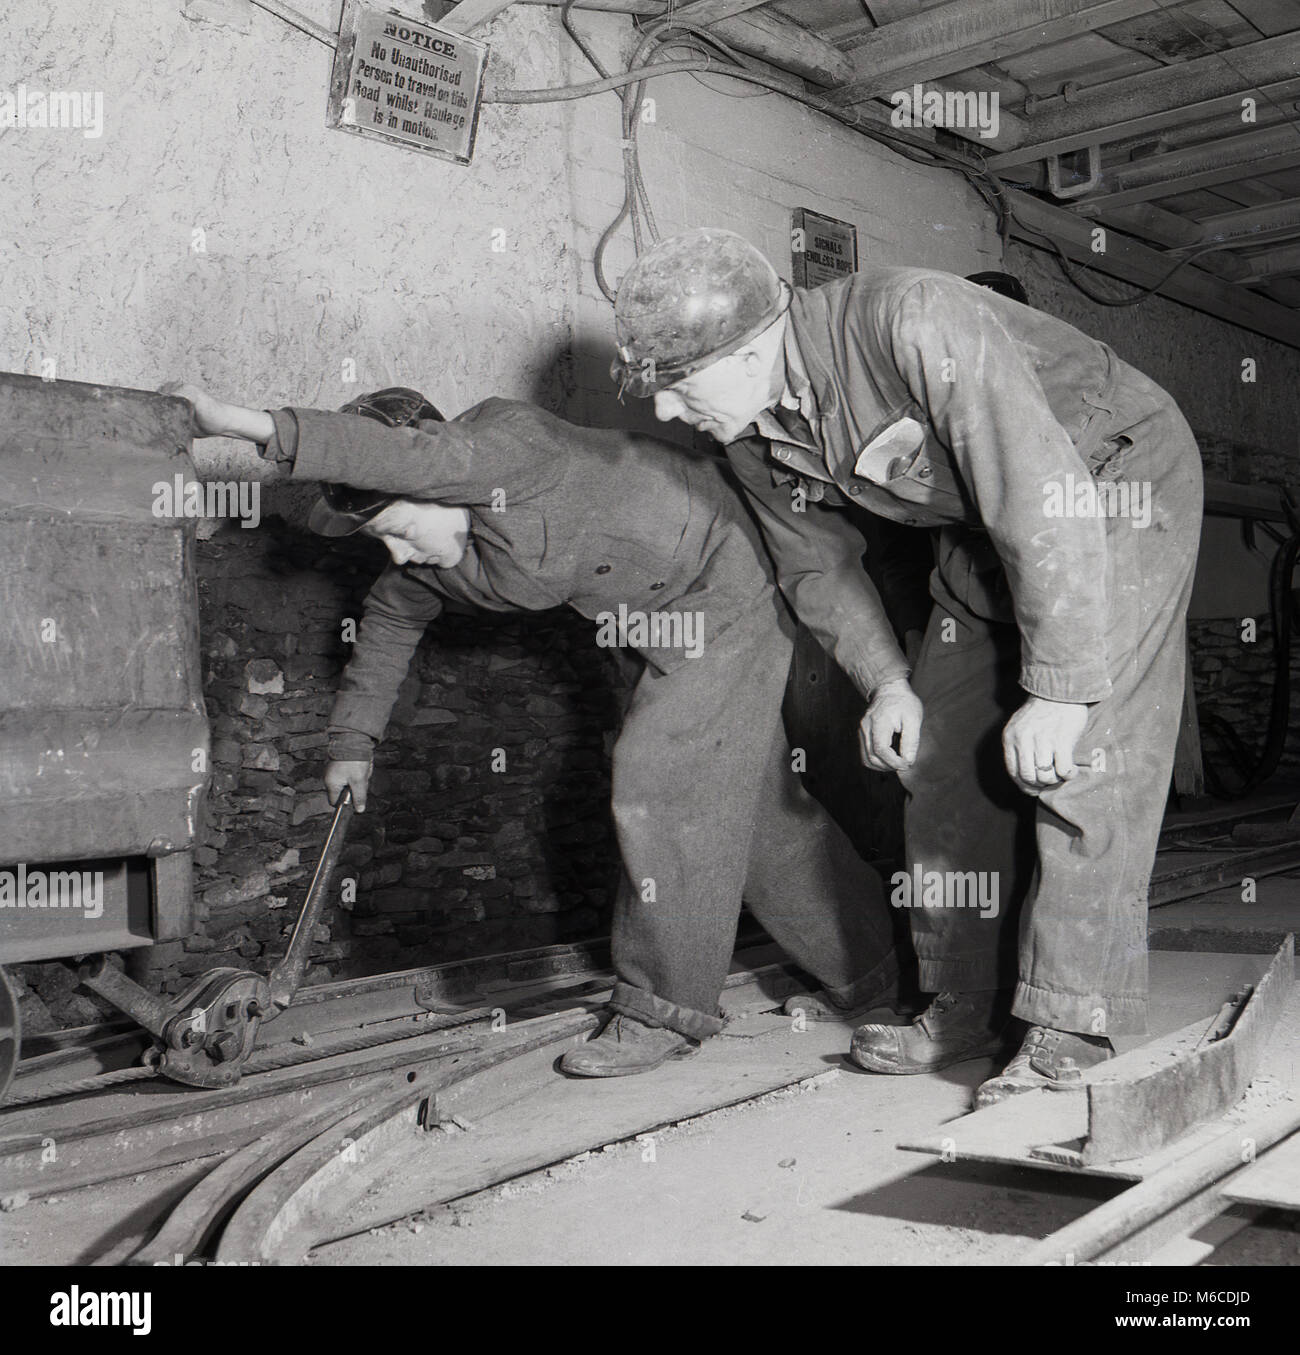 1950s, historical picture, a coal miner instructing a young male apprentice how to lock and unlock a mine trolley or minecart, England, UK Following WW2, there was a need to rebuild industry and infrastructure in Britain and so industrial apprenticeships in the field were important employment routes for many and were encouraged by the government of the day. At the time mining was a big industry in many parts of the UK, including Nottinghamshire, Derbyshire and South Yorkshire, and so many youngsters worked at the mines for the National Coal Board. Stock Photo